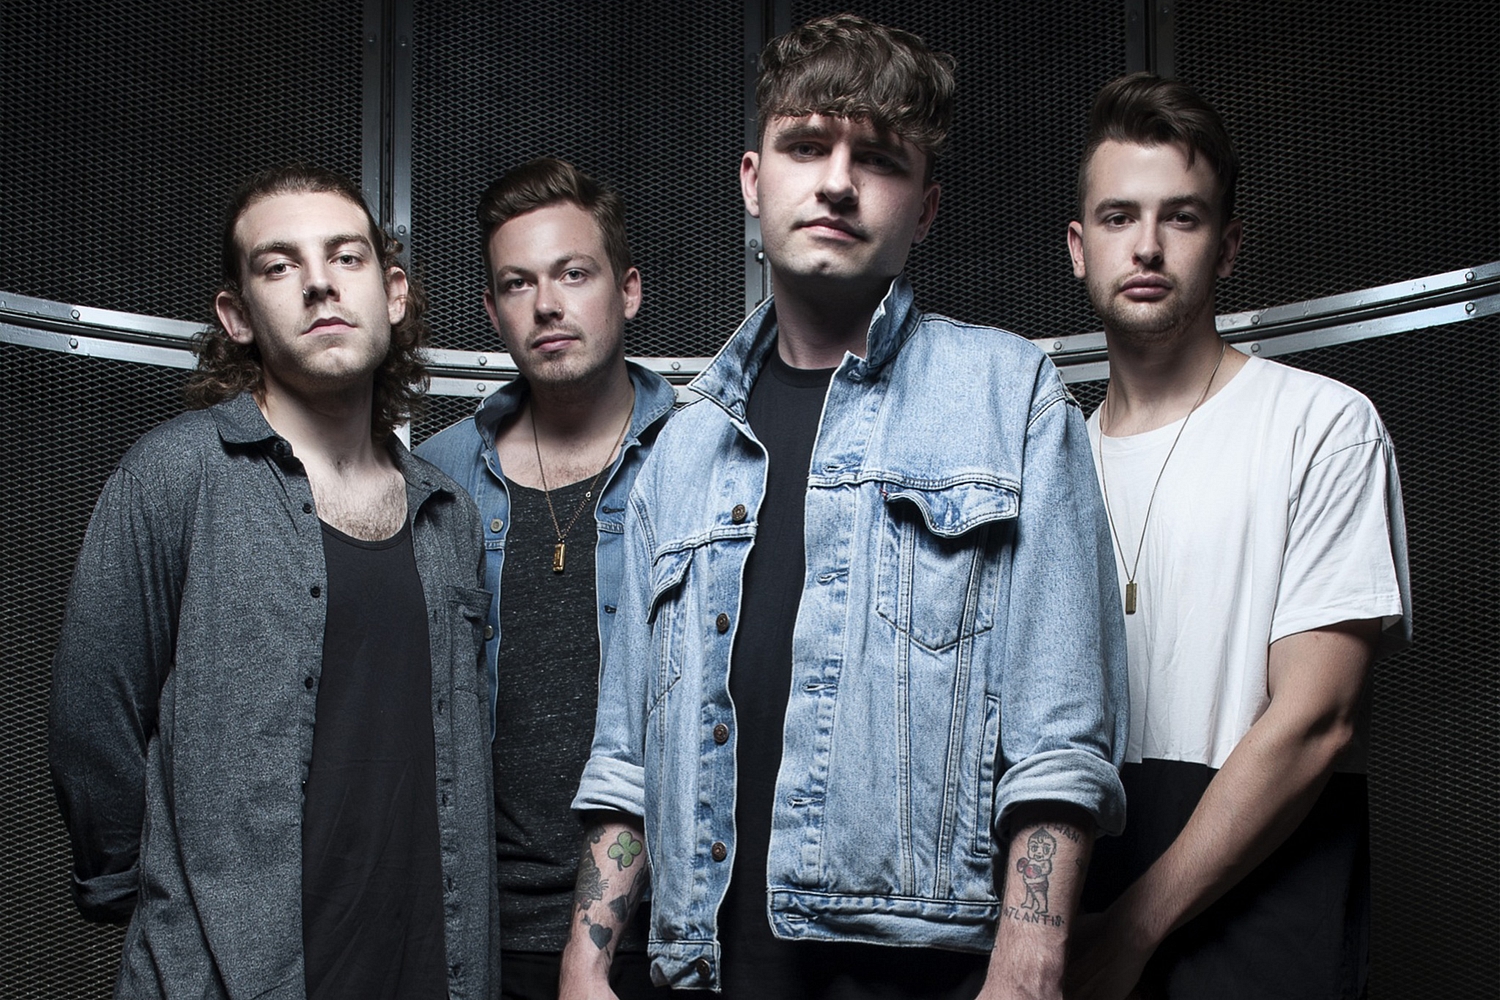 Lower Than Atlantis: “There are bigger things to come!”